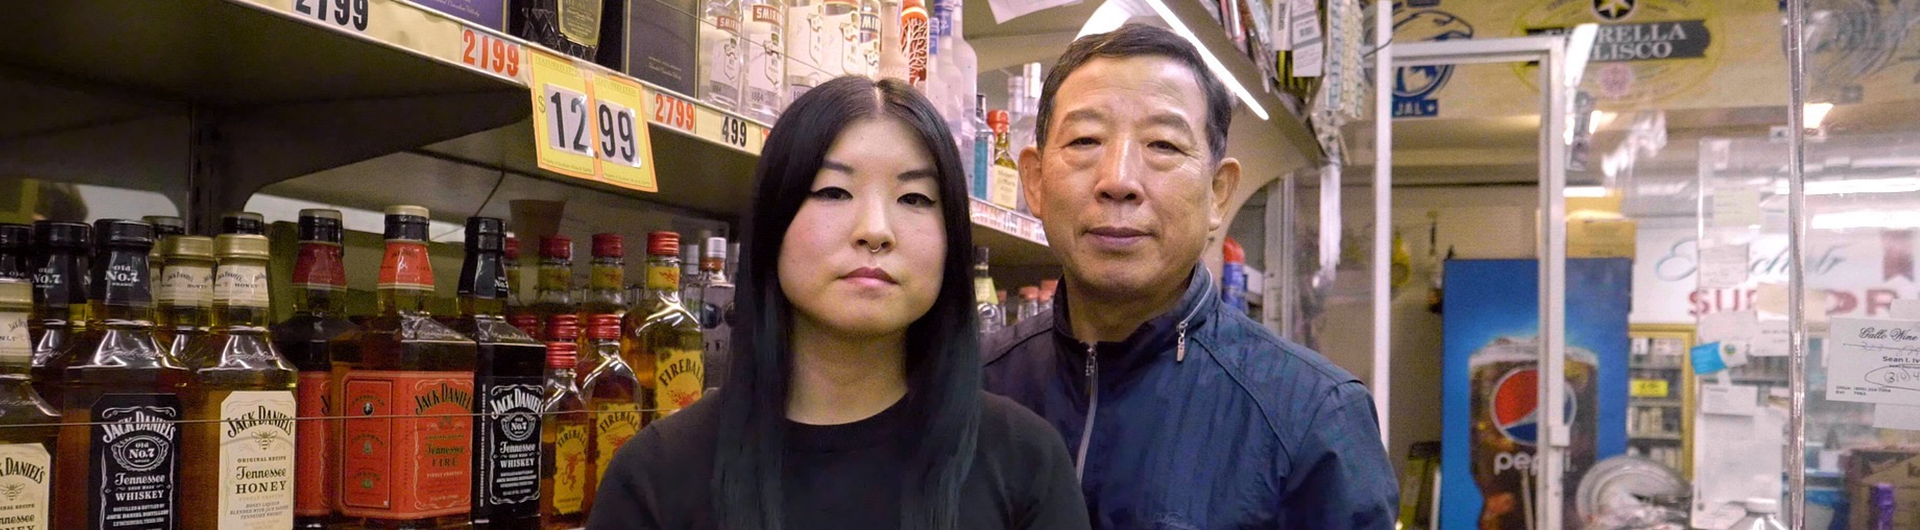 Two people standing in a liquor store by shelfs of alcohol